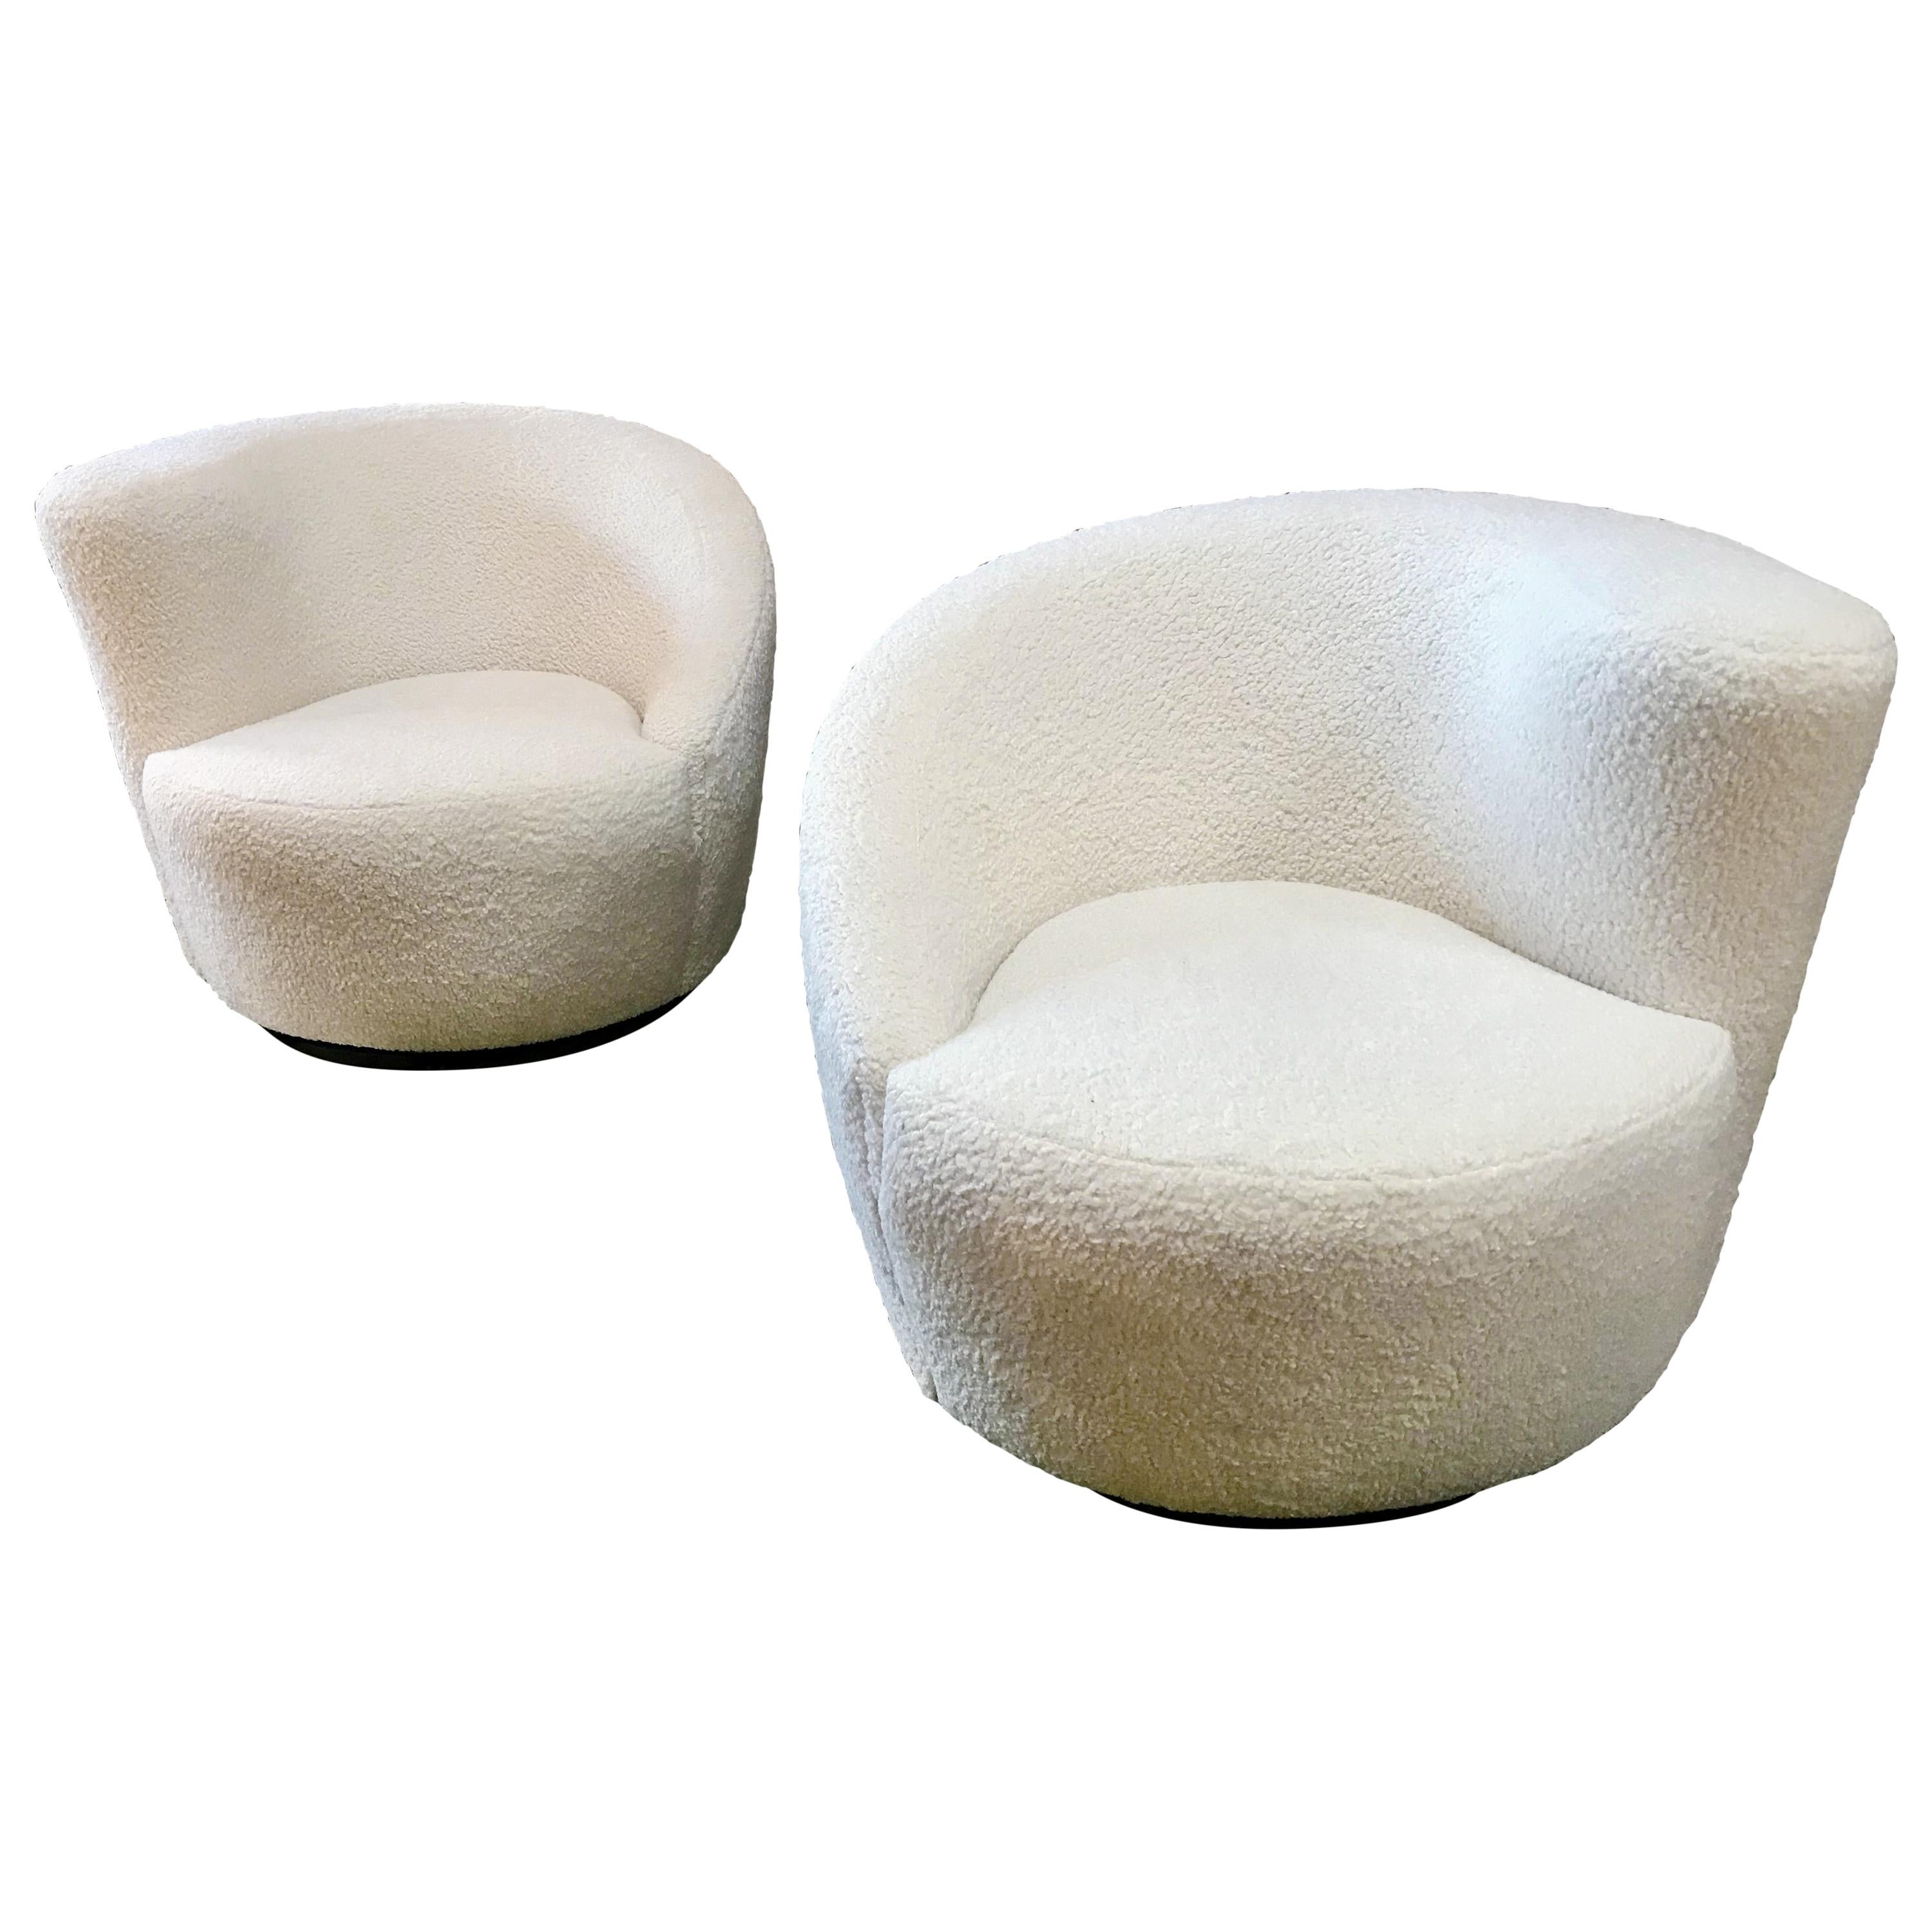 Pair of Swivel Parlor Chairs Upholstered in White Sheep Fabric, USA, 1960s